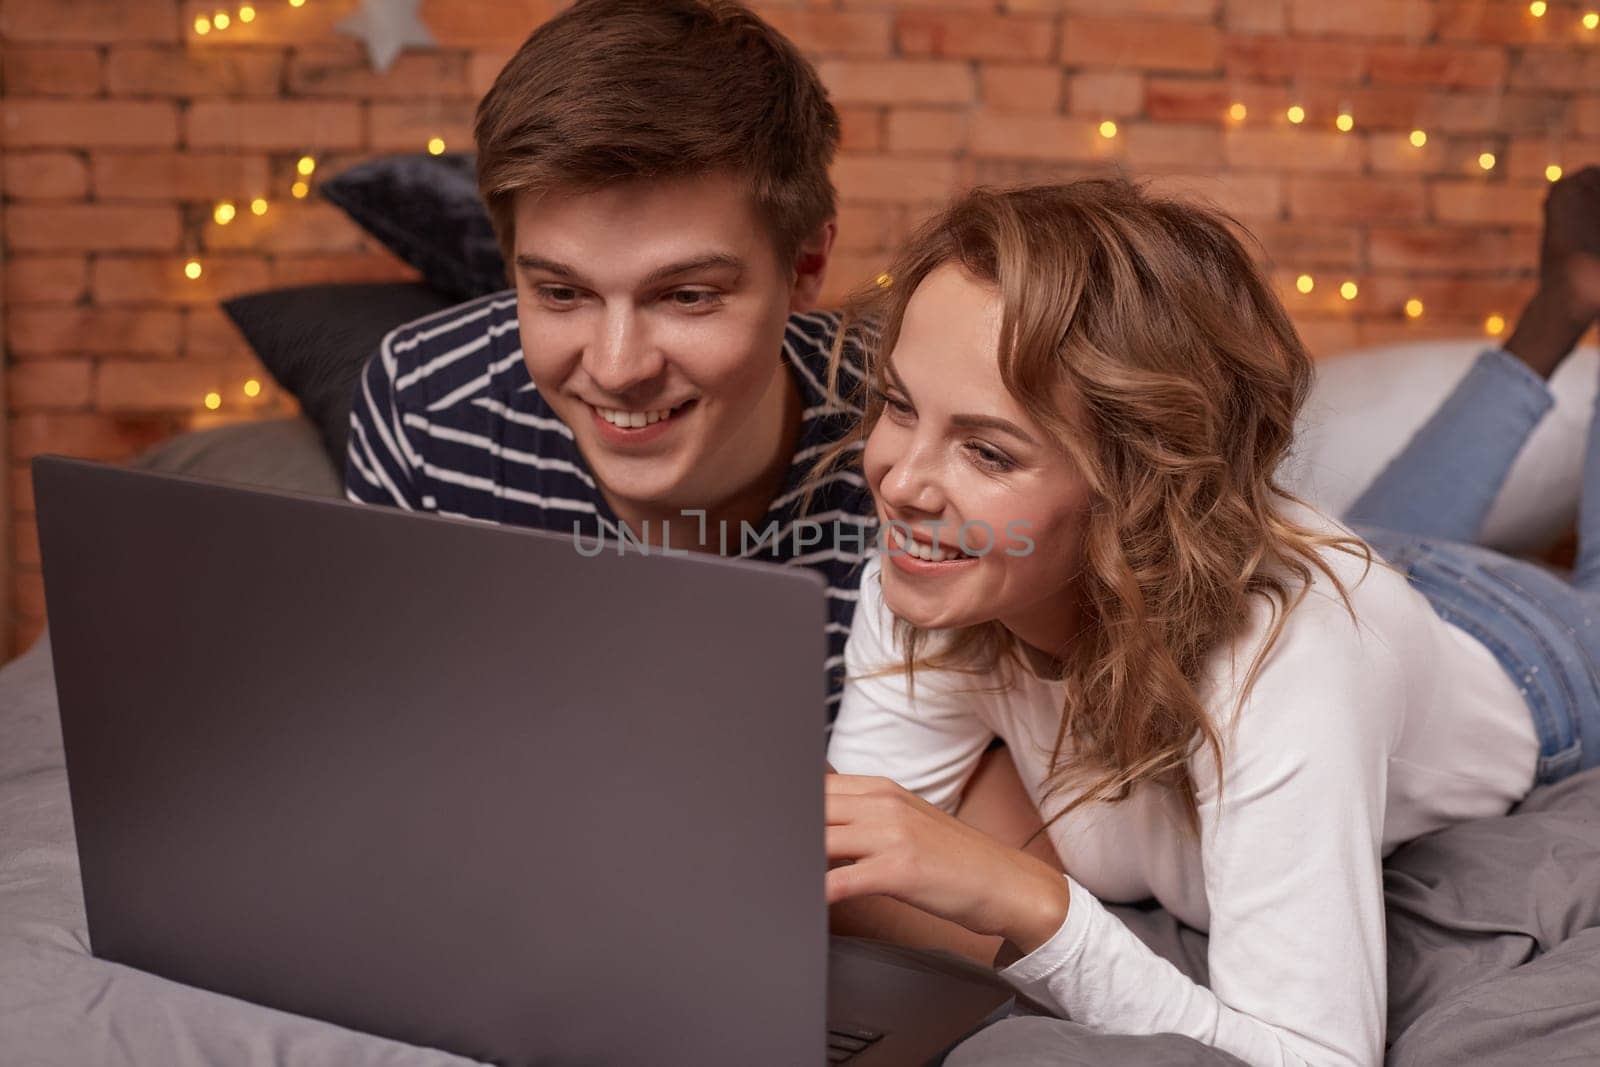 Smiling young man and woman lying in bed and watching something on the laptop. They're happy and lovely